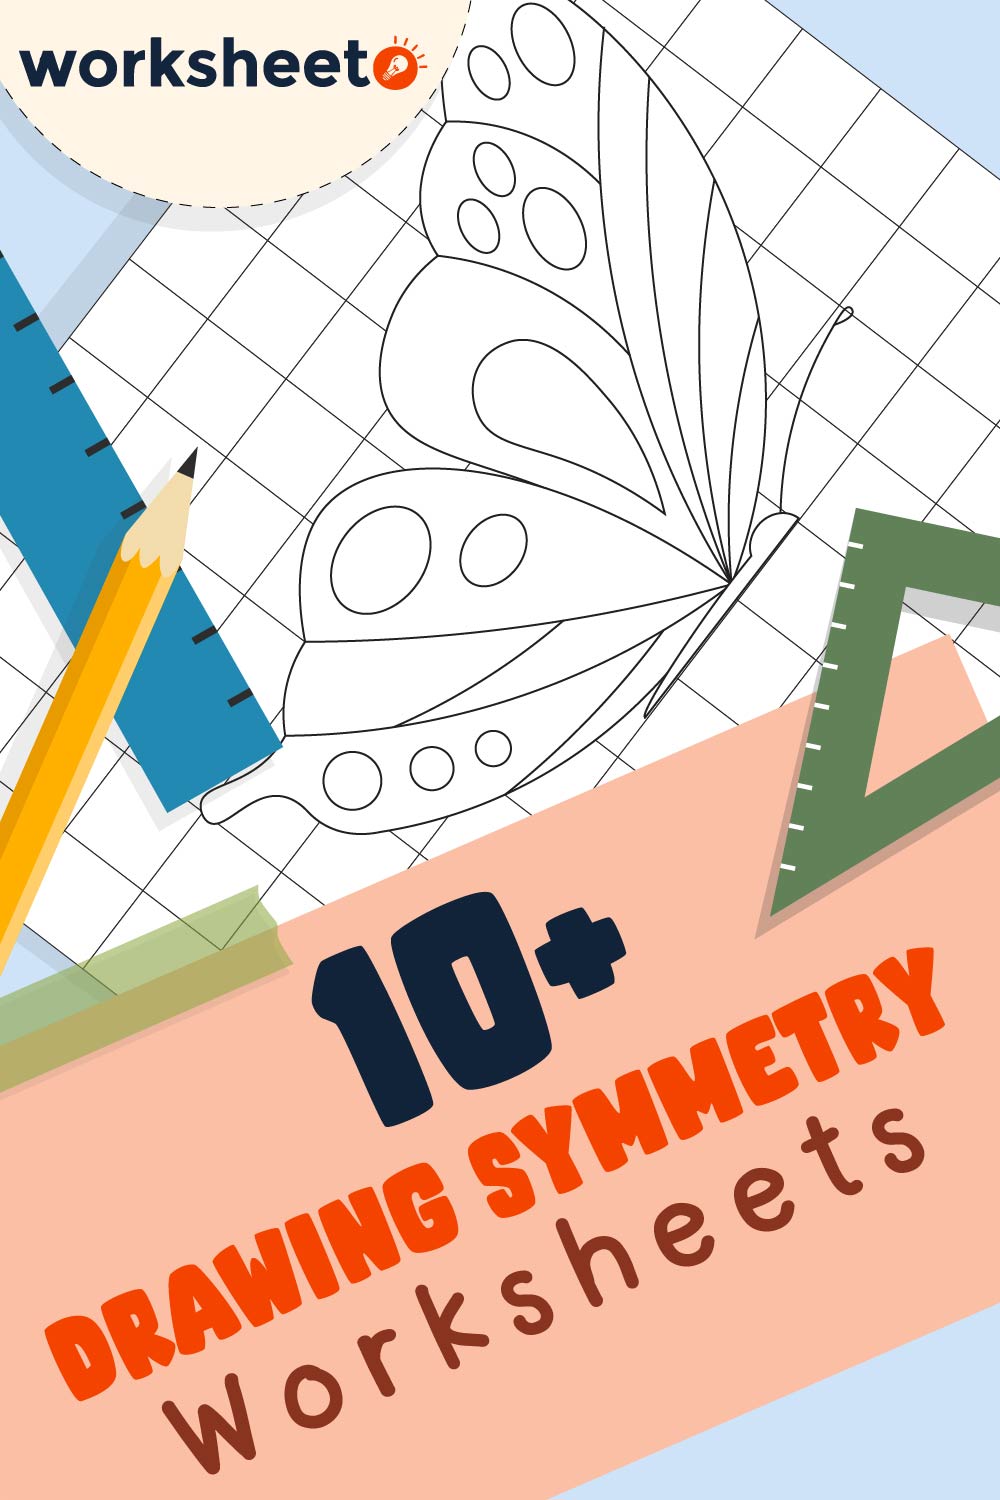 Drawing Symmetry Worksheets